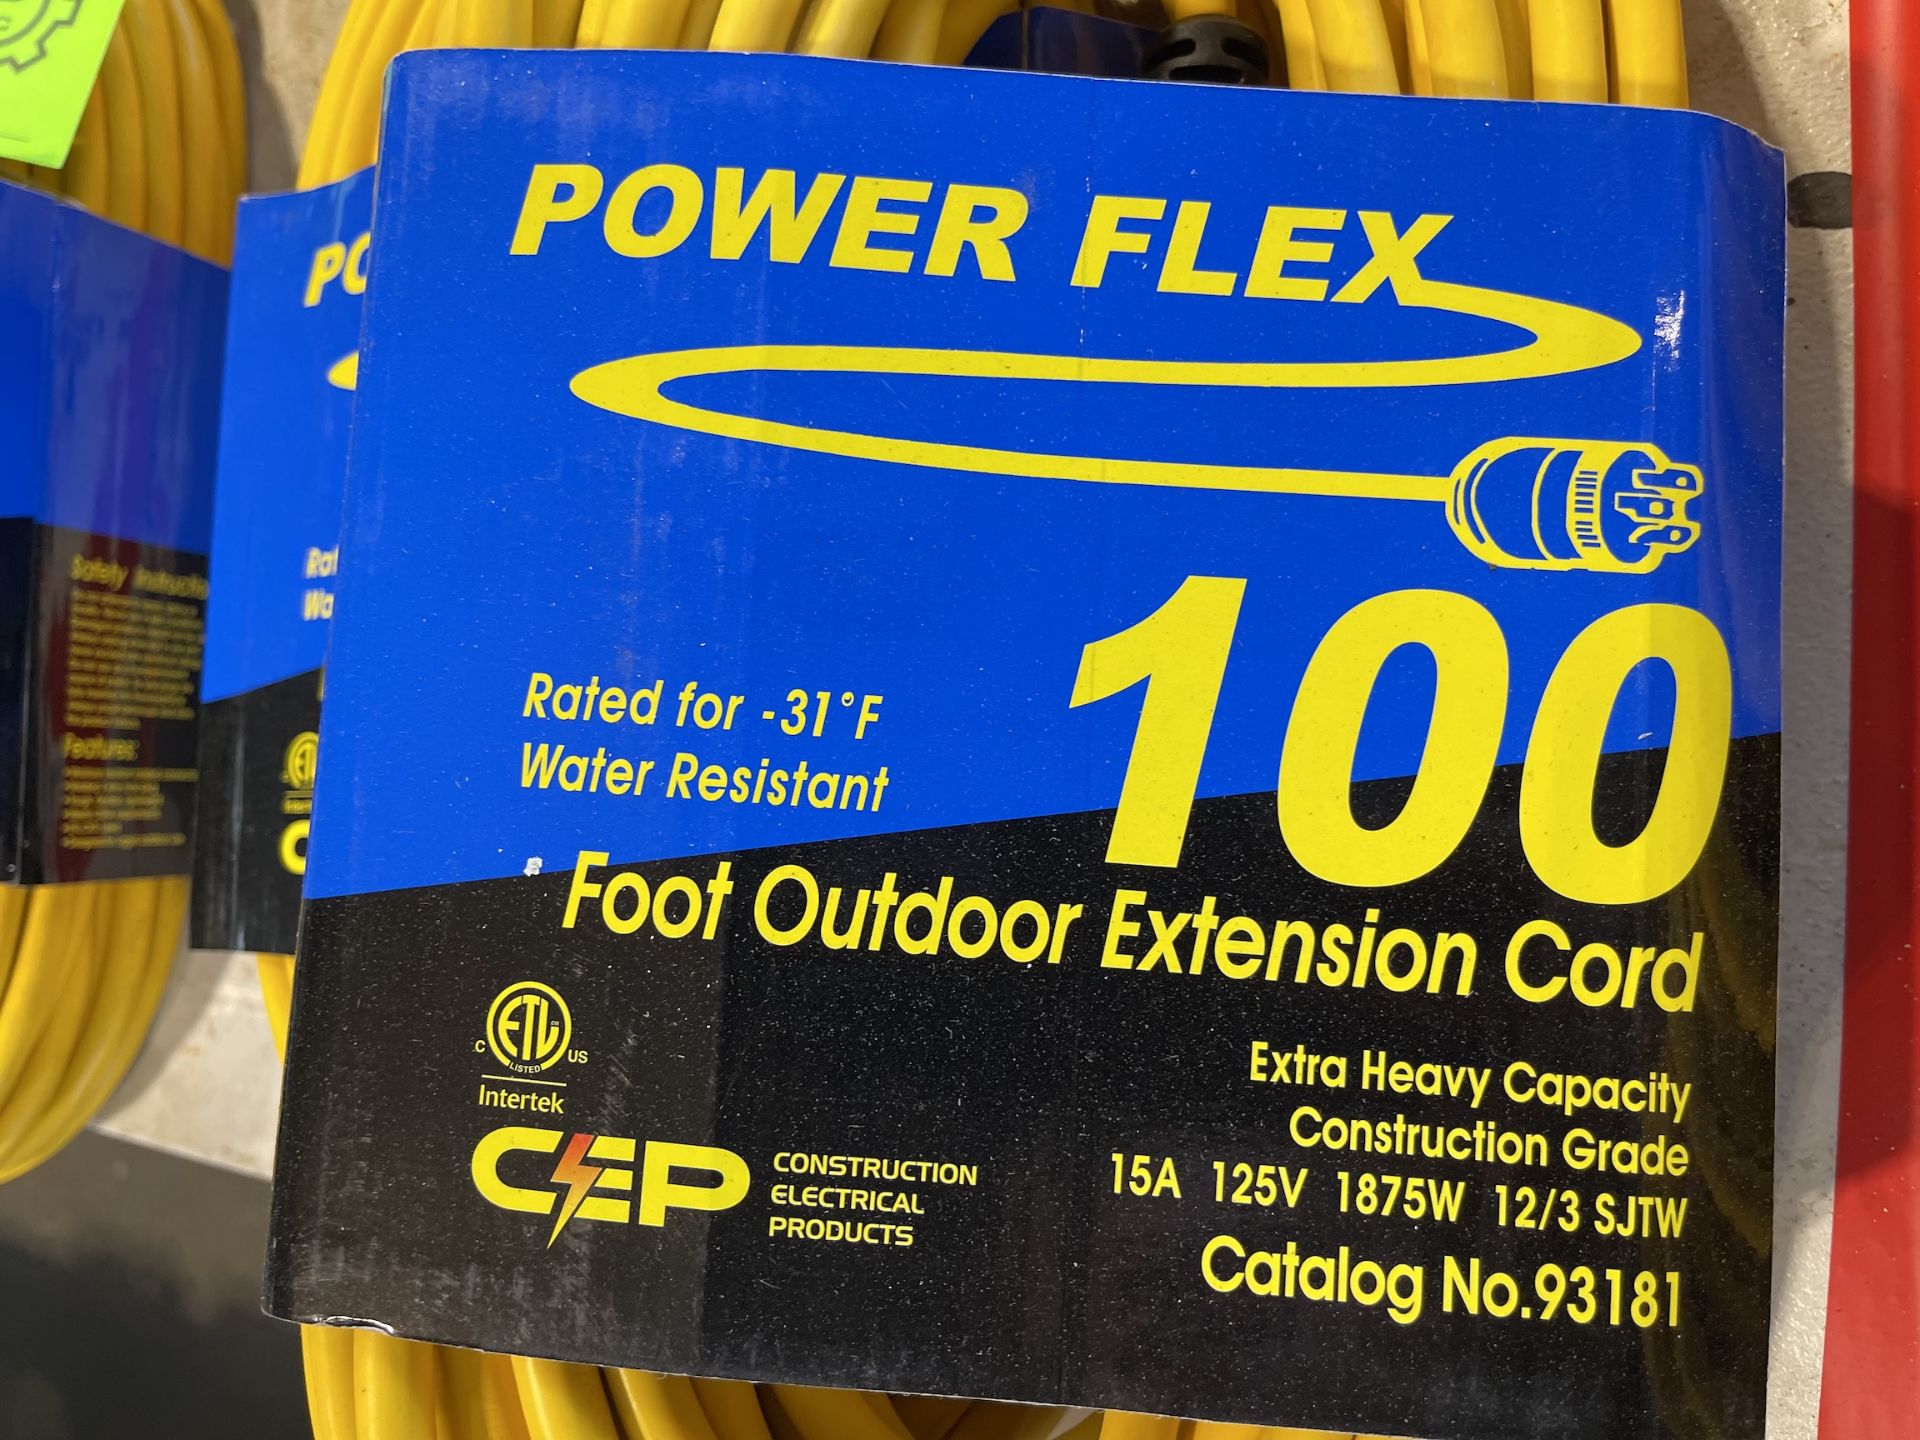 Lot of 4 100ft Outdoor Extension Cords - Upland - Image 2 of 4